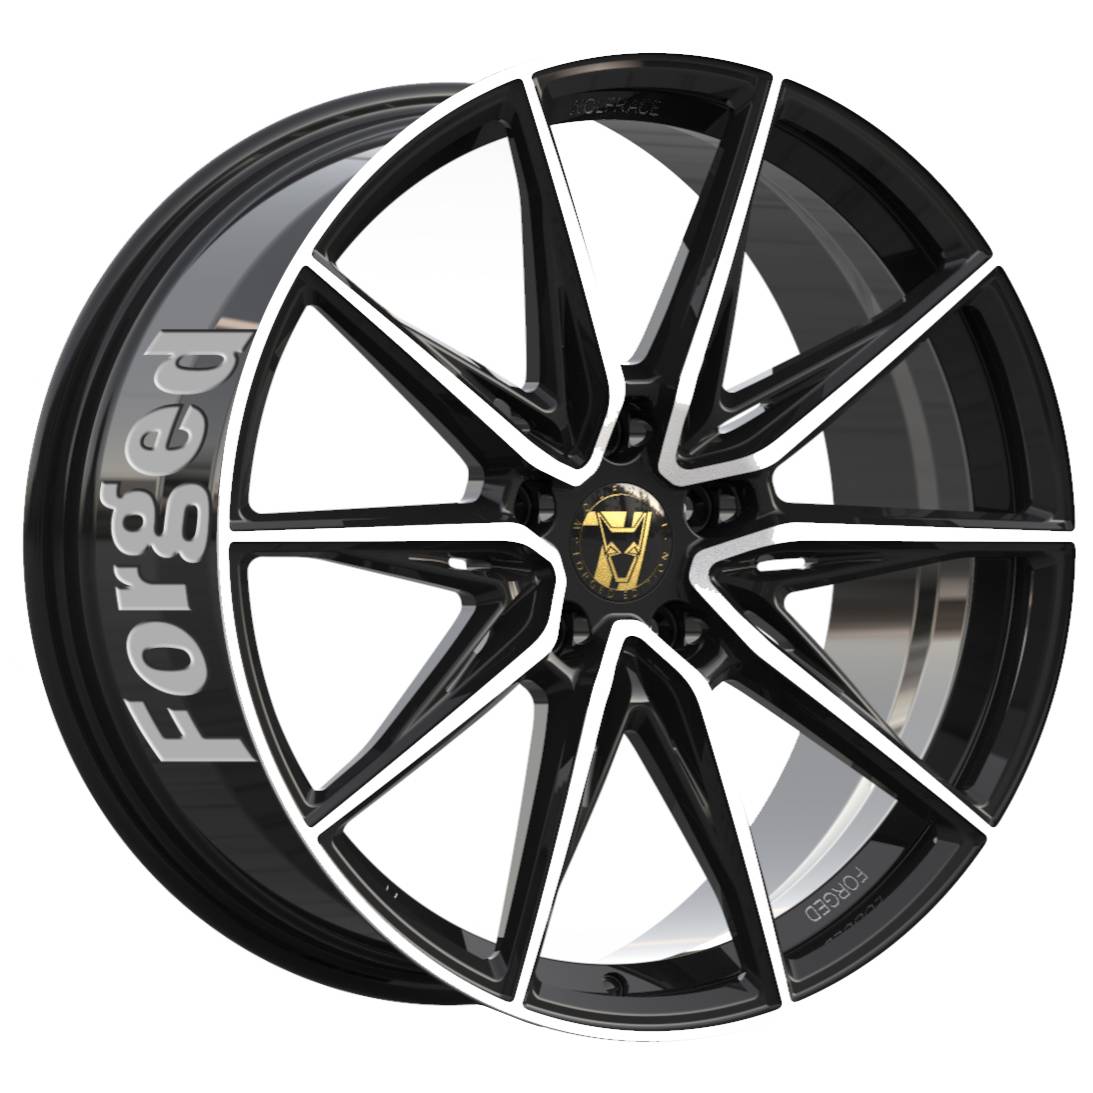 Demon Wheels 71 Forged Edition Urban Racer Forged [13x23] -5x115- ET 35